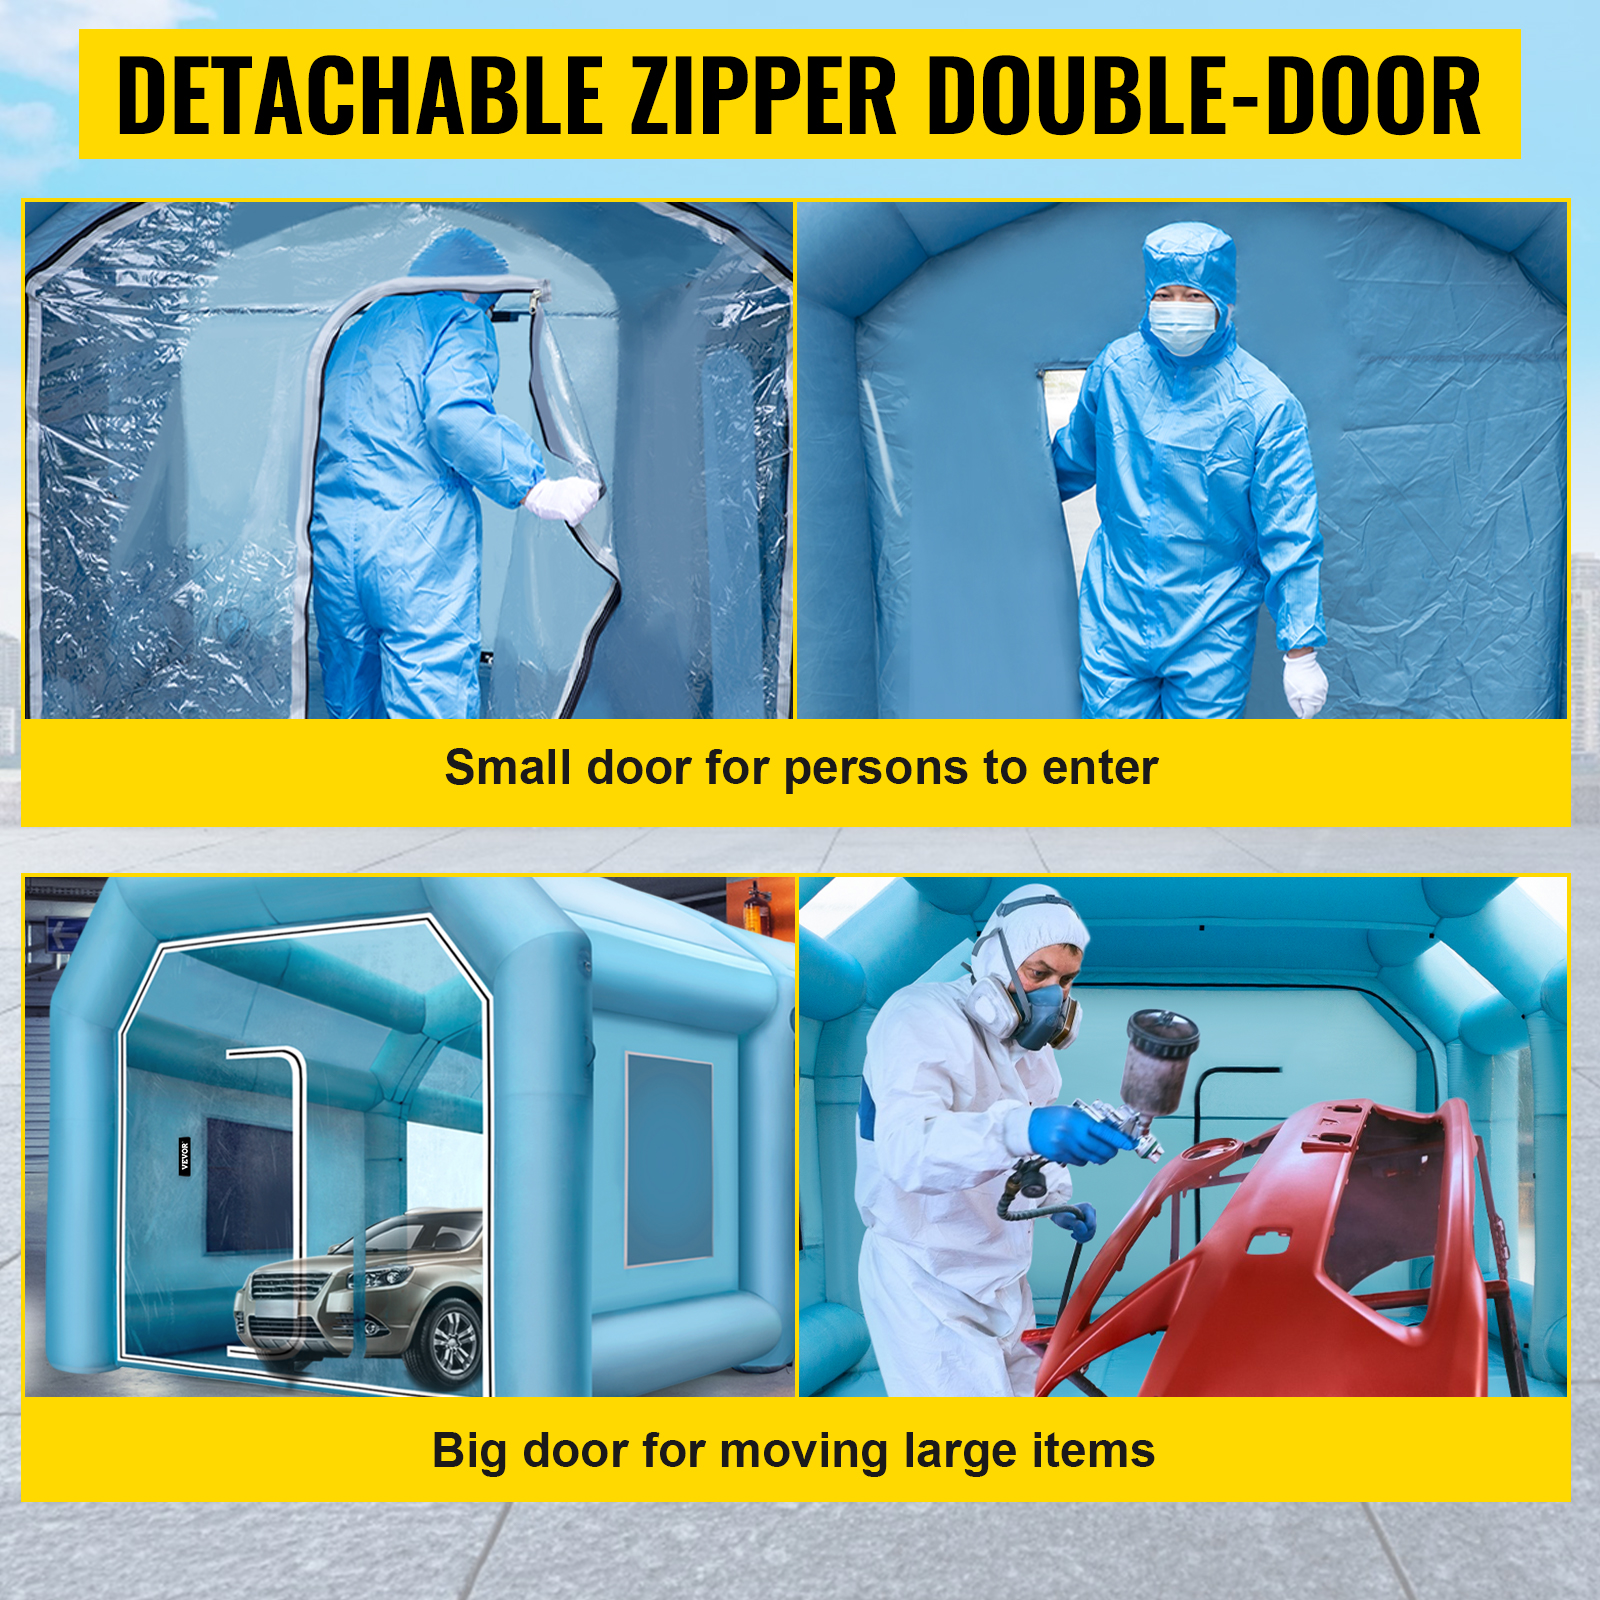 Portable Inflatable Paint Booth Mobile Car Spray Booth 26x13x10 Ft